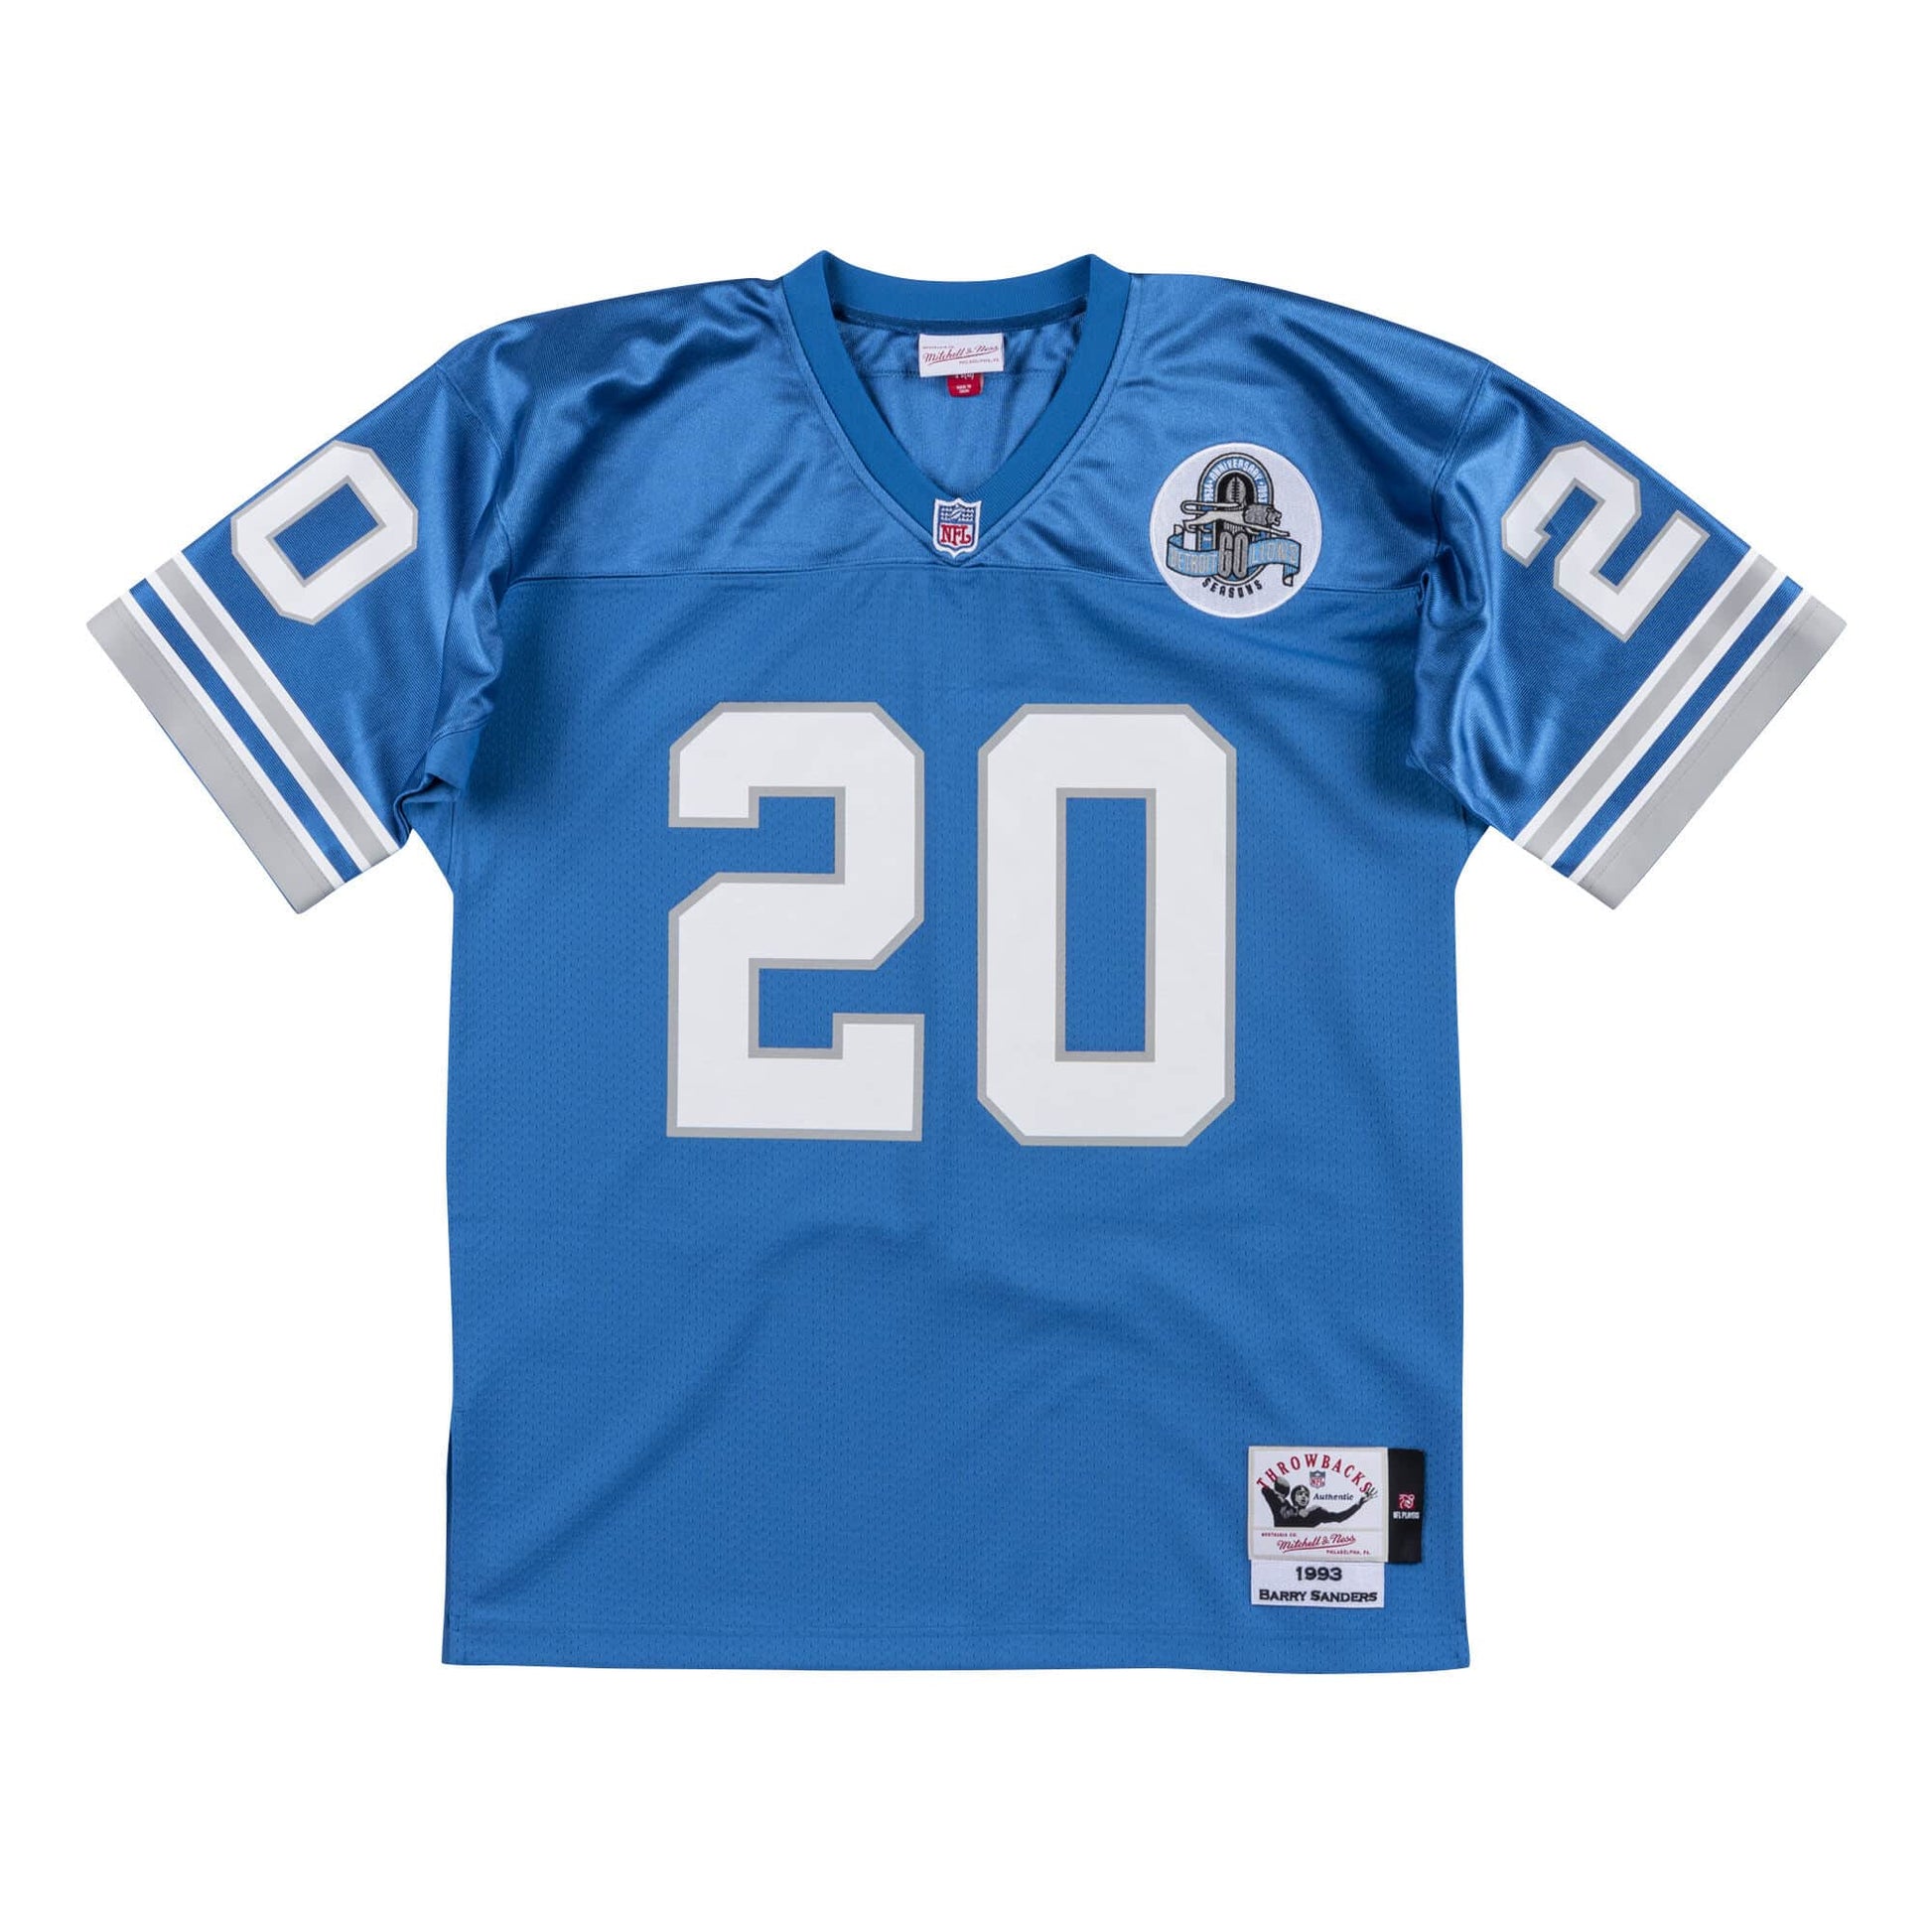 barry sanders jersey authentic